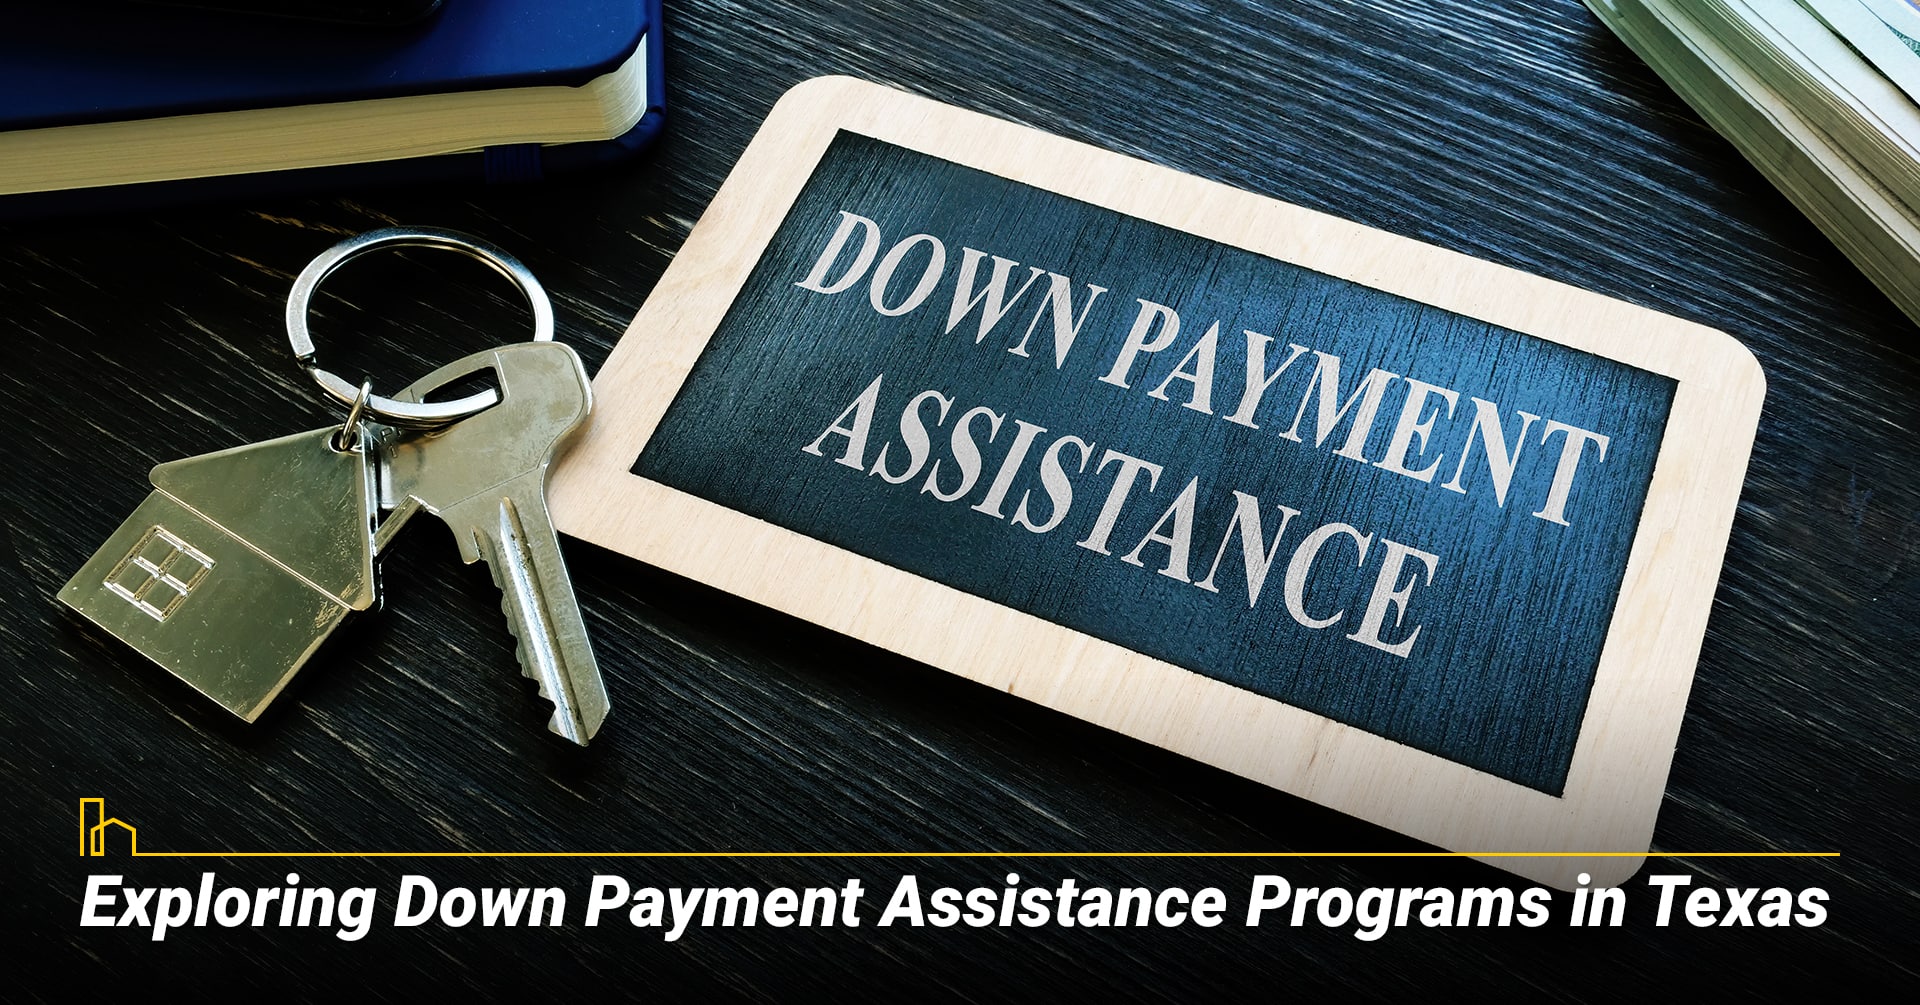 4. Exploring Down Payment Assistance Programs in Texas